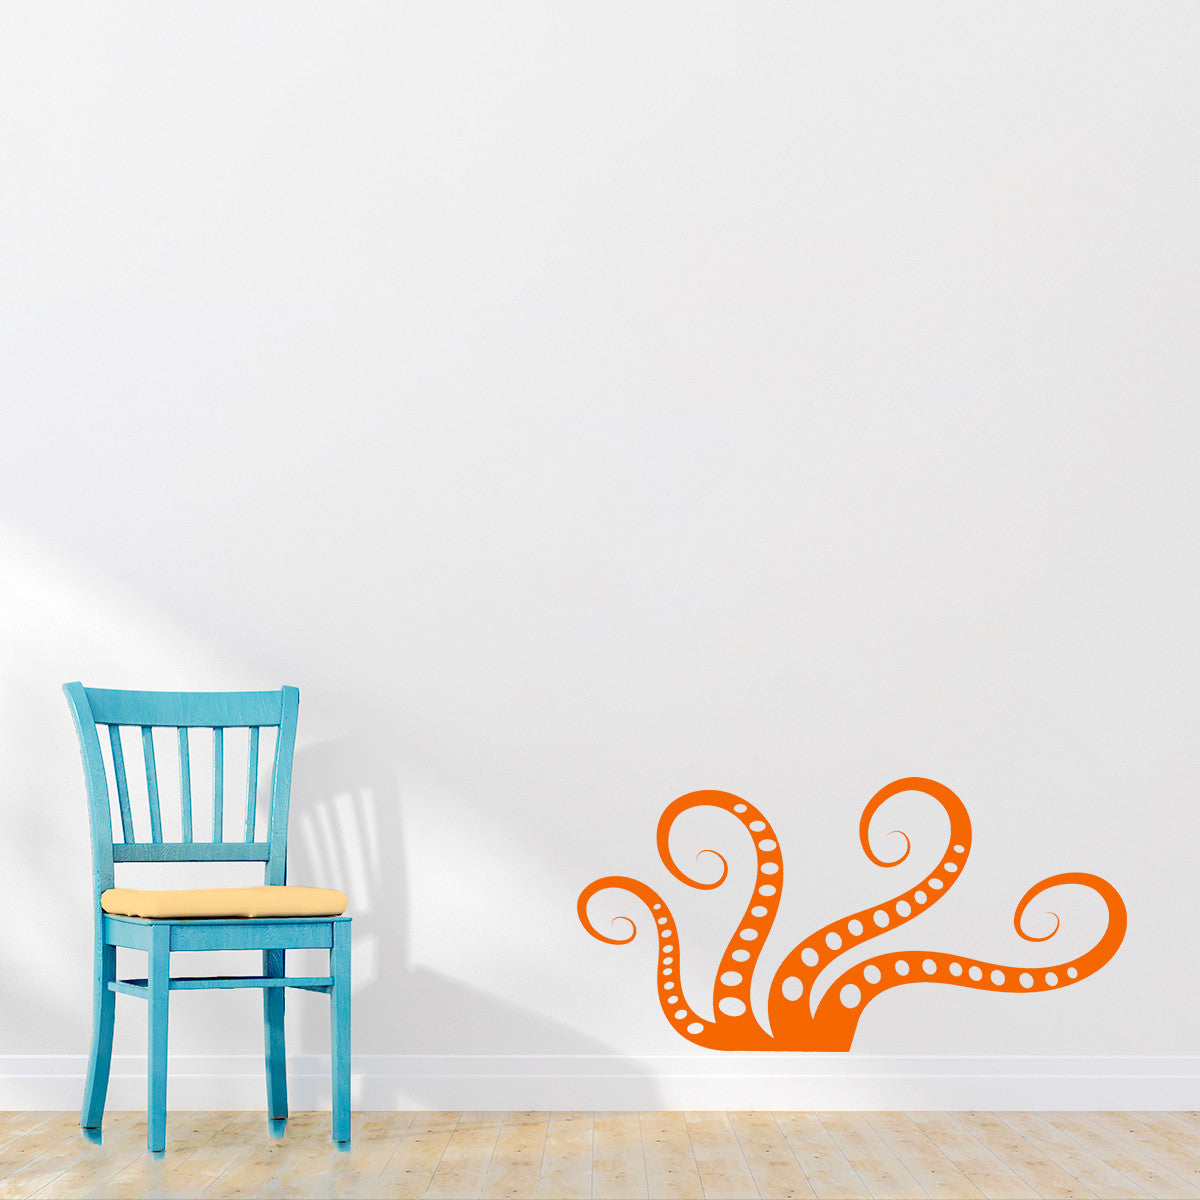 Octopus tentacles | Wall decal - Adnil Creations